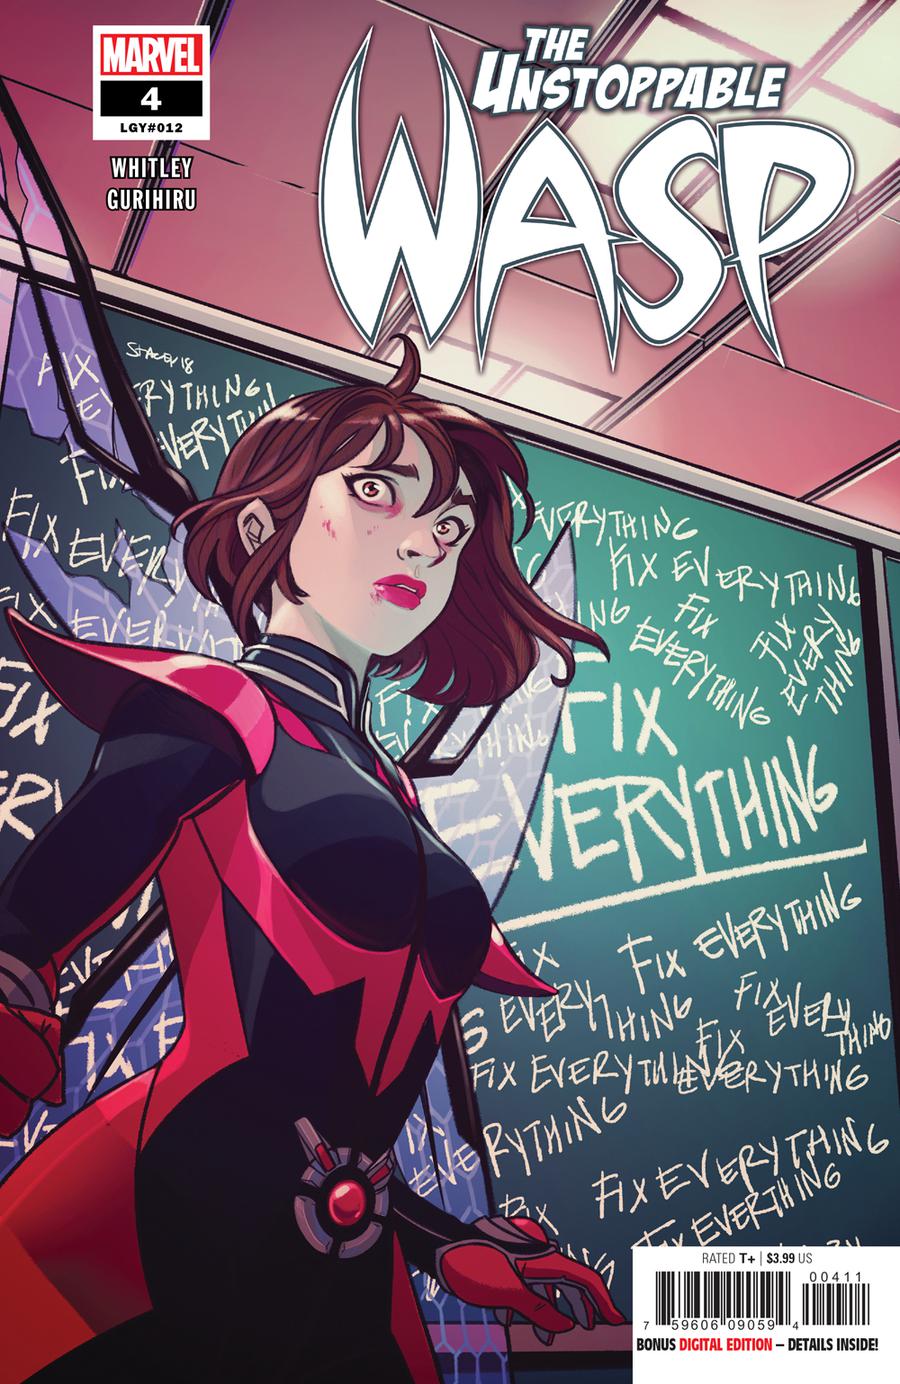 Unstoppable Wasp Vol 2 #4